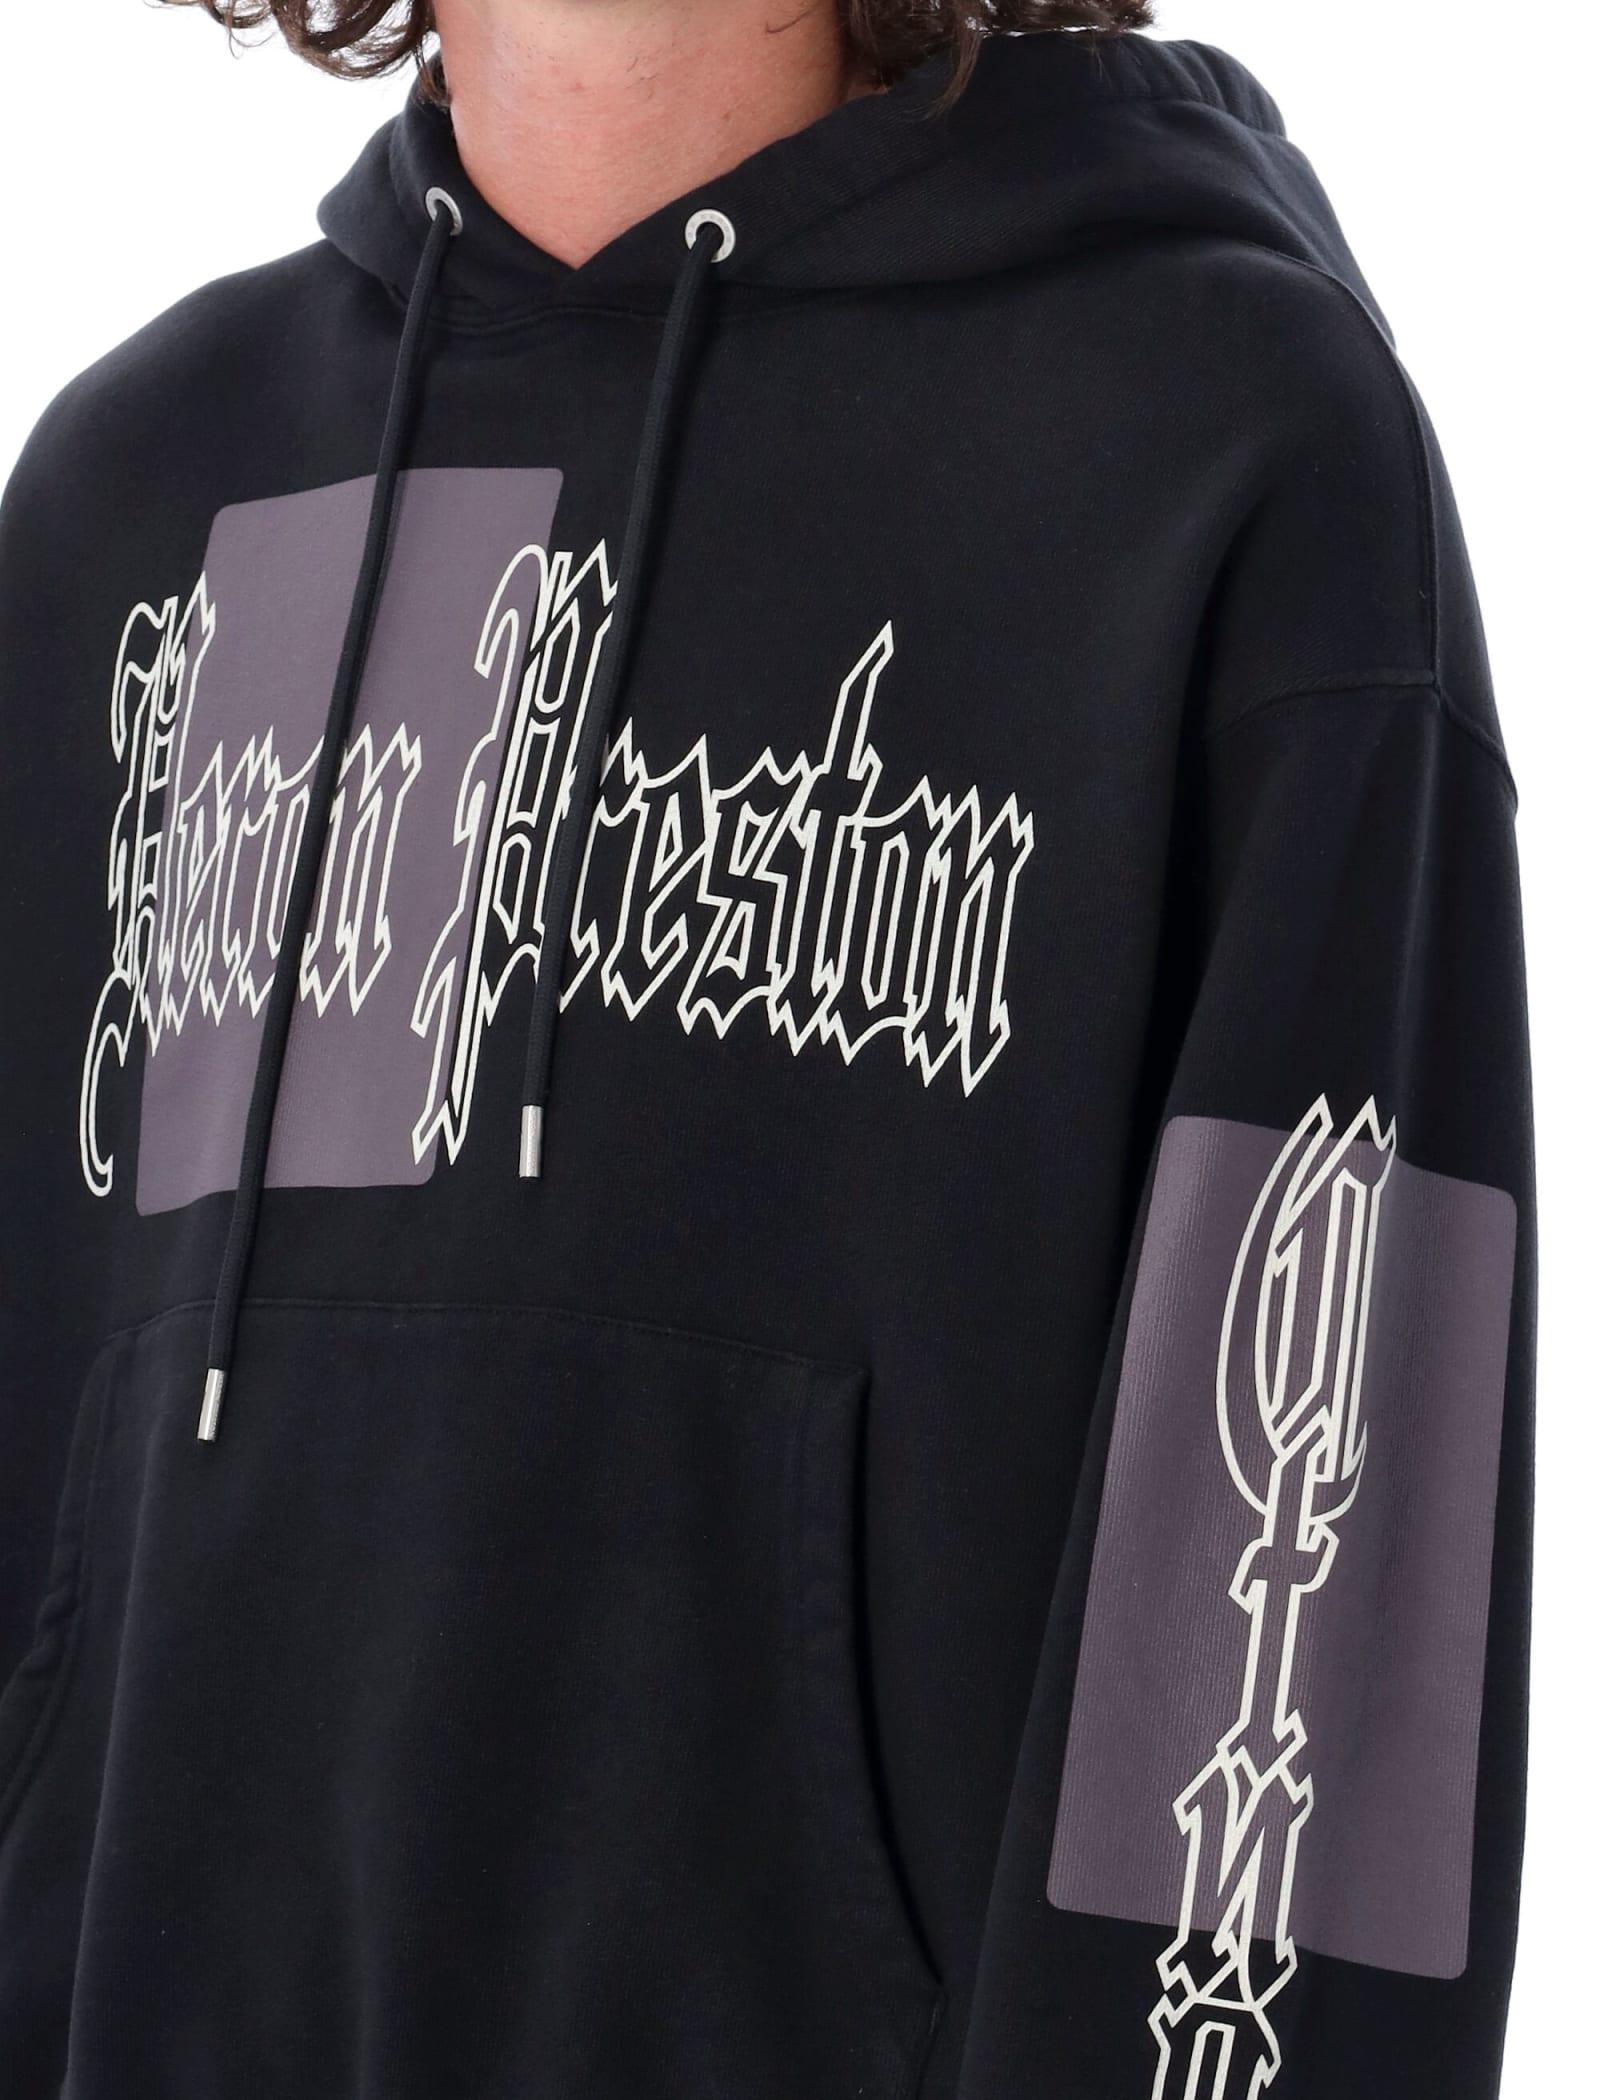 Mens Clothing Activewear Heron Preston Cotton Gothic Color Blocks Hoodie in Black for Men gym and workout clothes Hoodies 